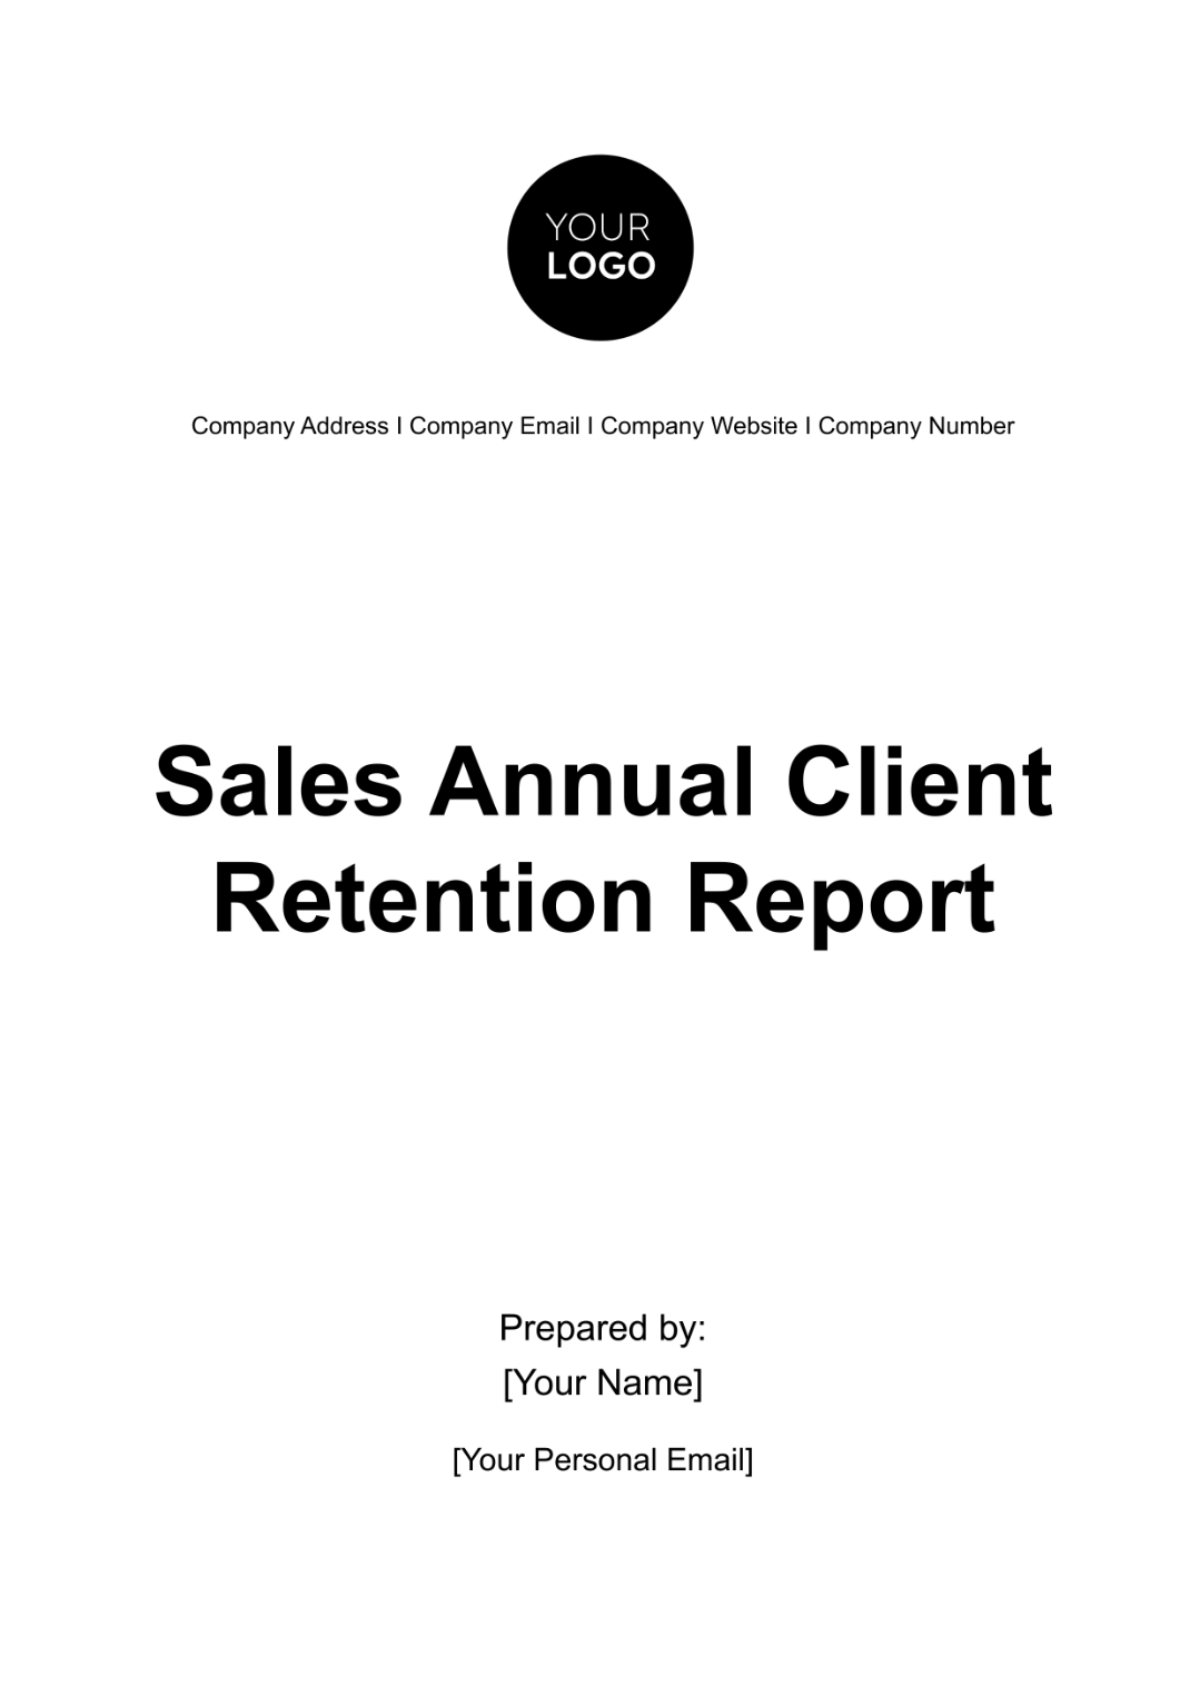 Free Sales Annual Client Retention Report Template